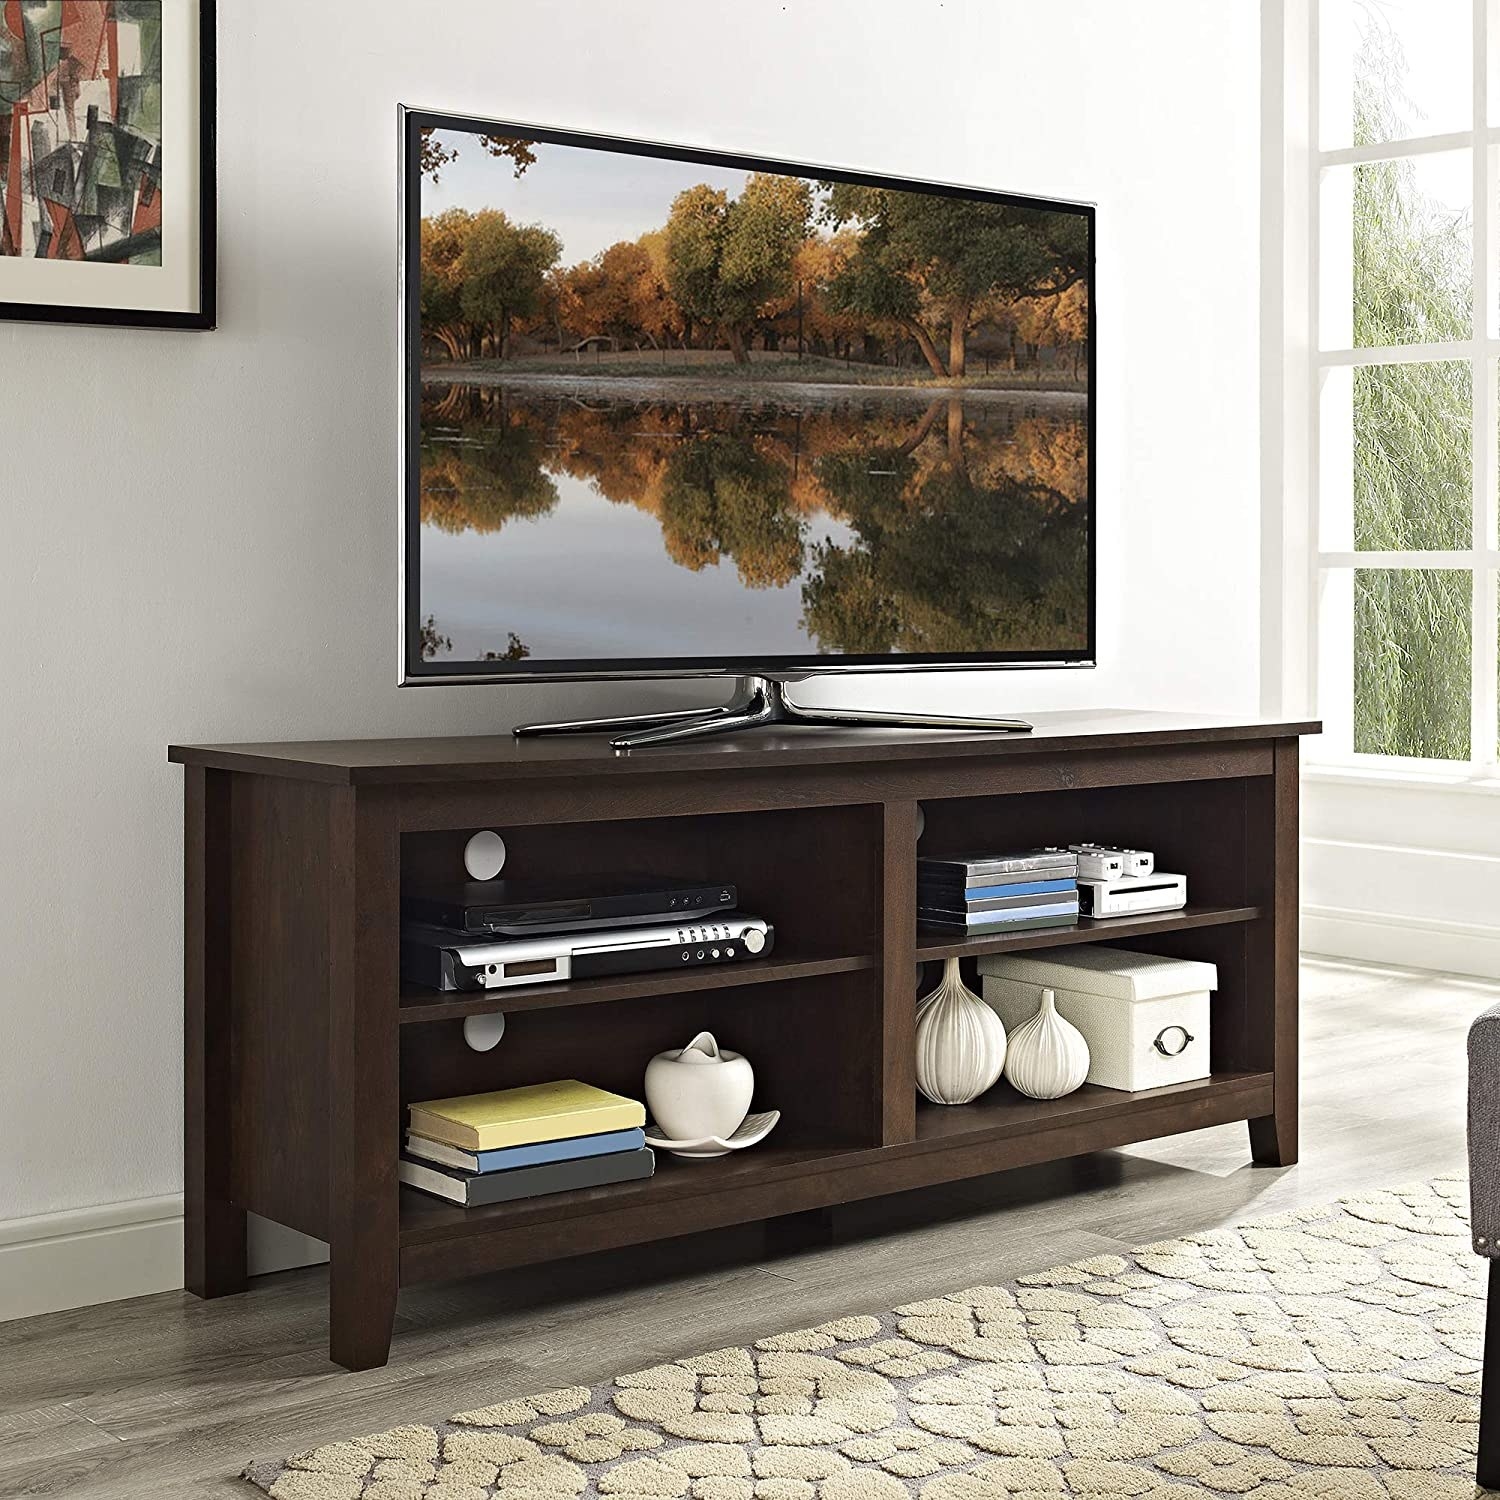 Television Stand in living room